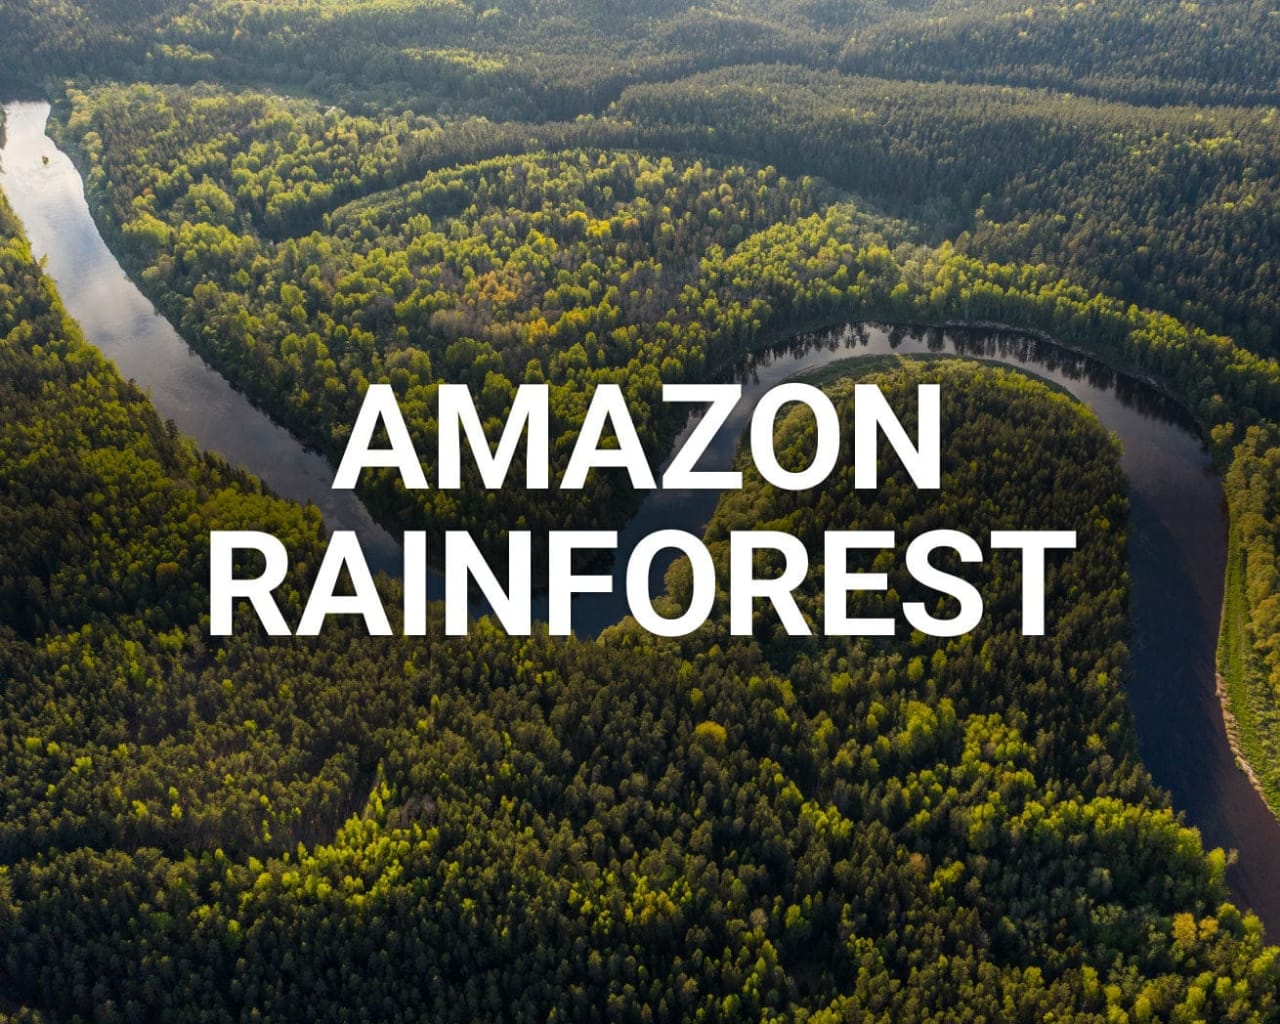 10 Incredible facts about Amazon Rainforest